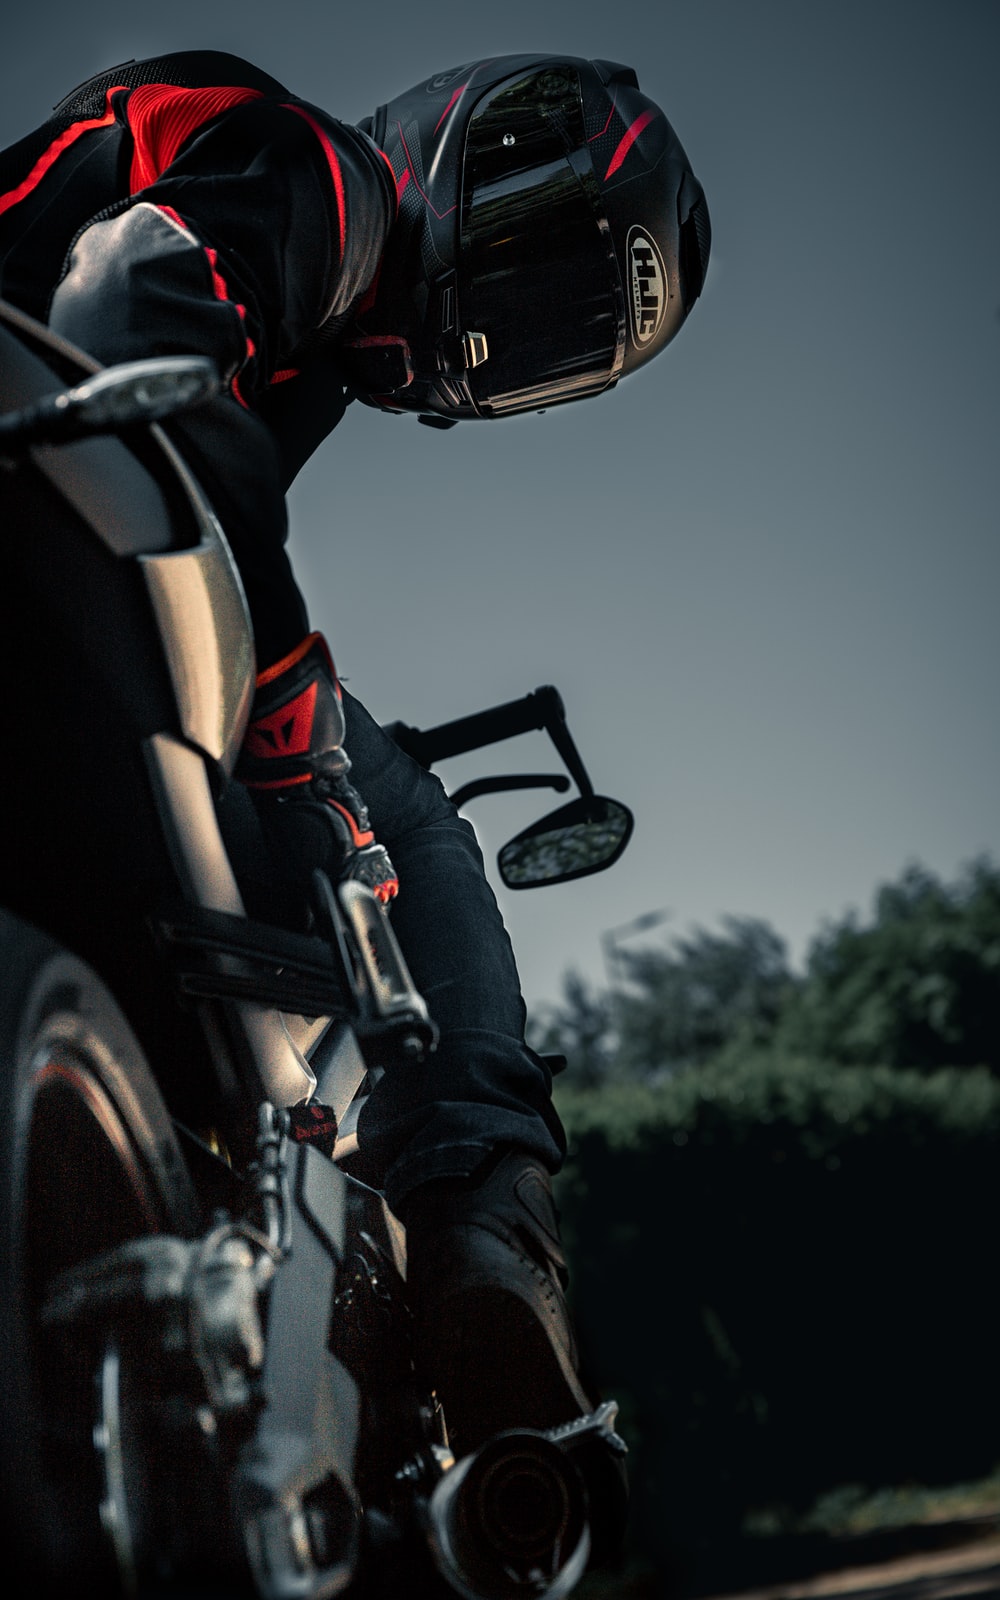 Motorbike Picture. Download Free Image